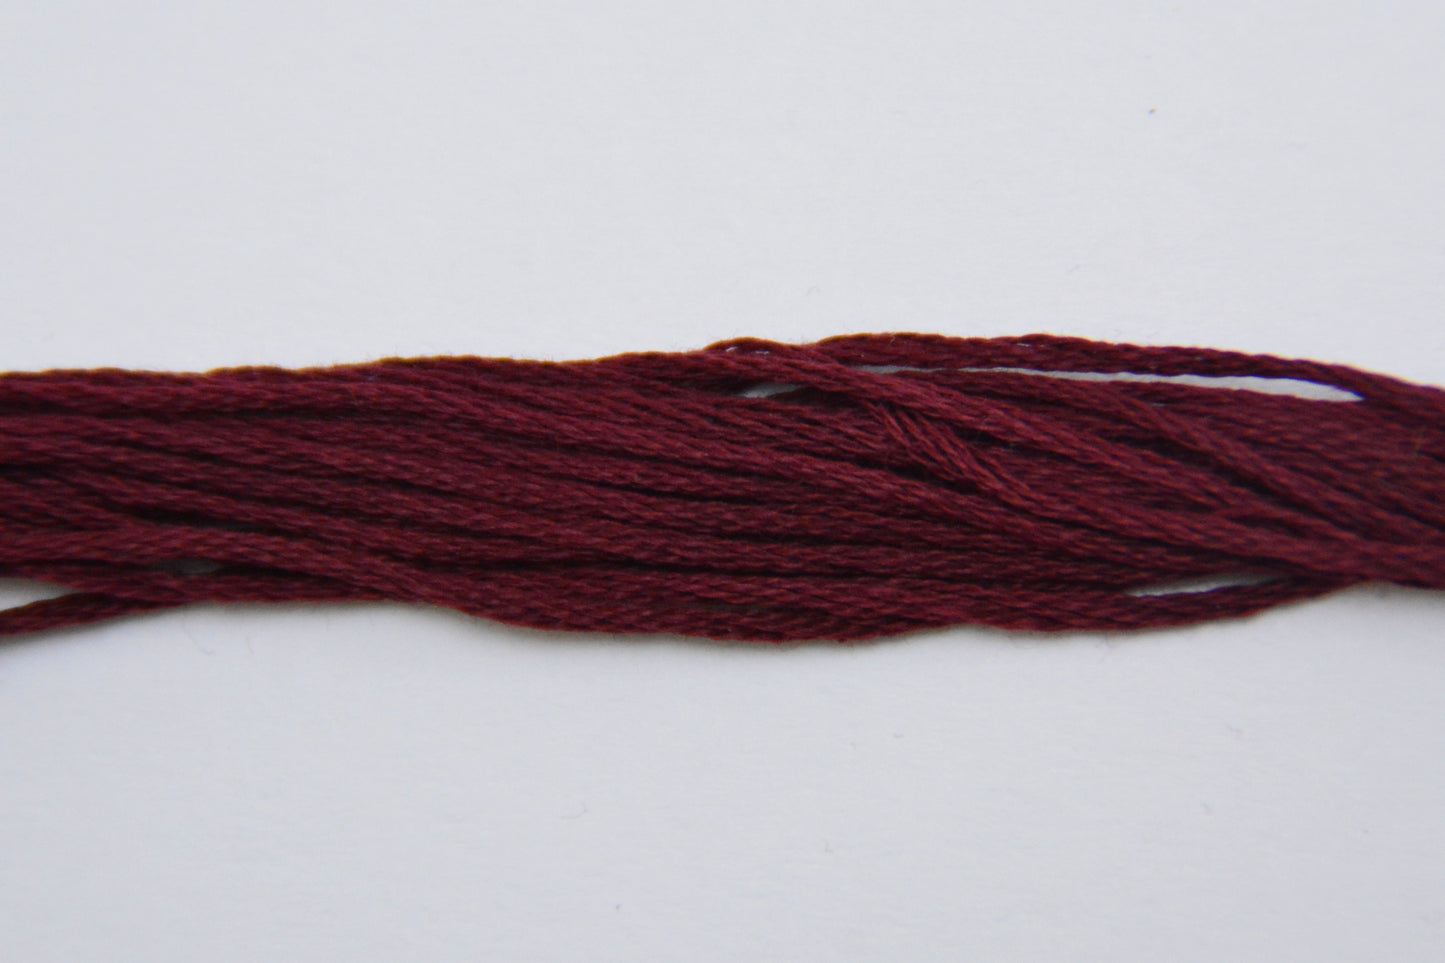 Crimson 3860 Weeks Dye Works 6-Strand Hand-Dyed Embroidery Floss